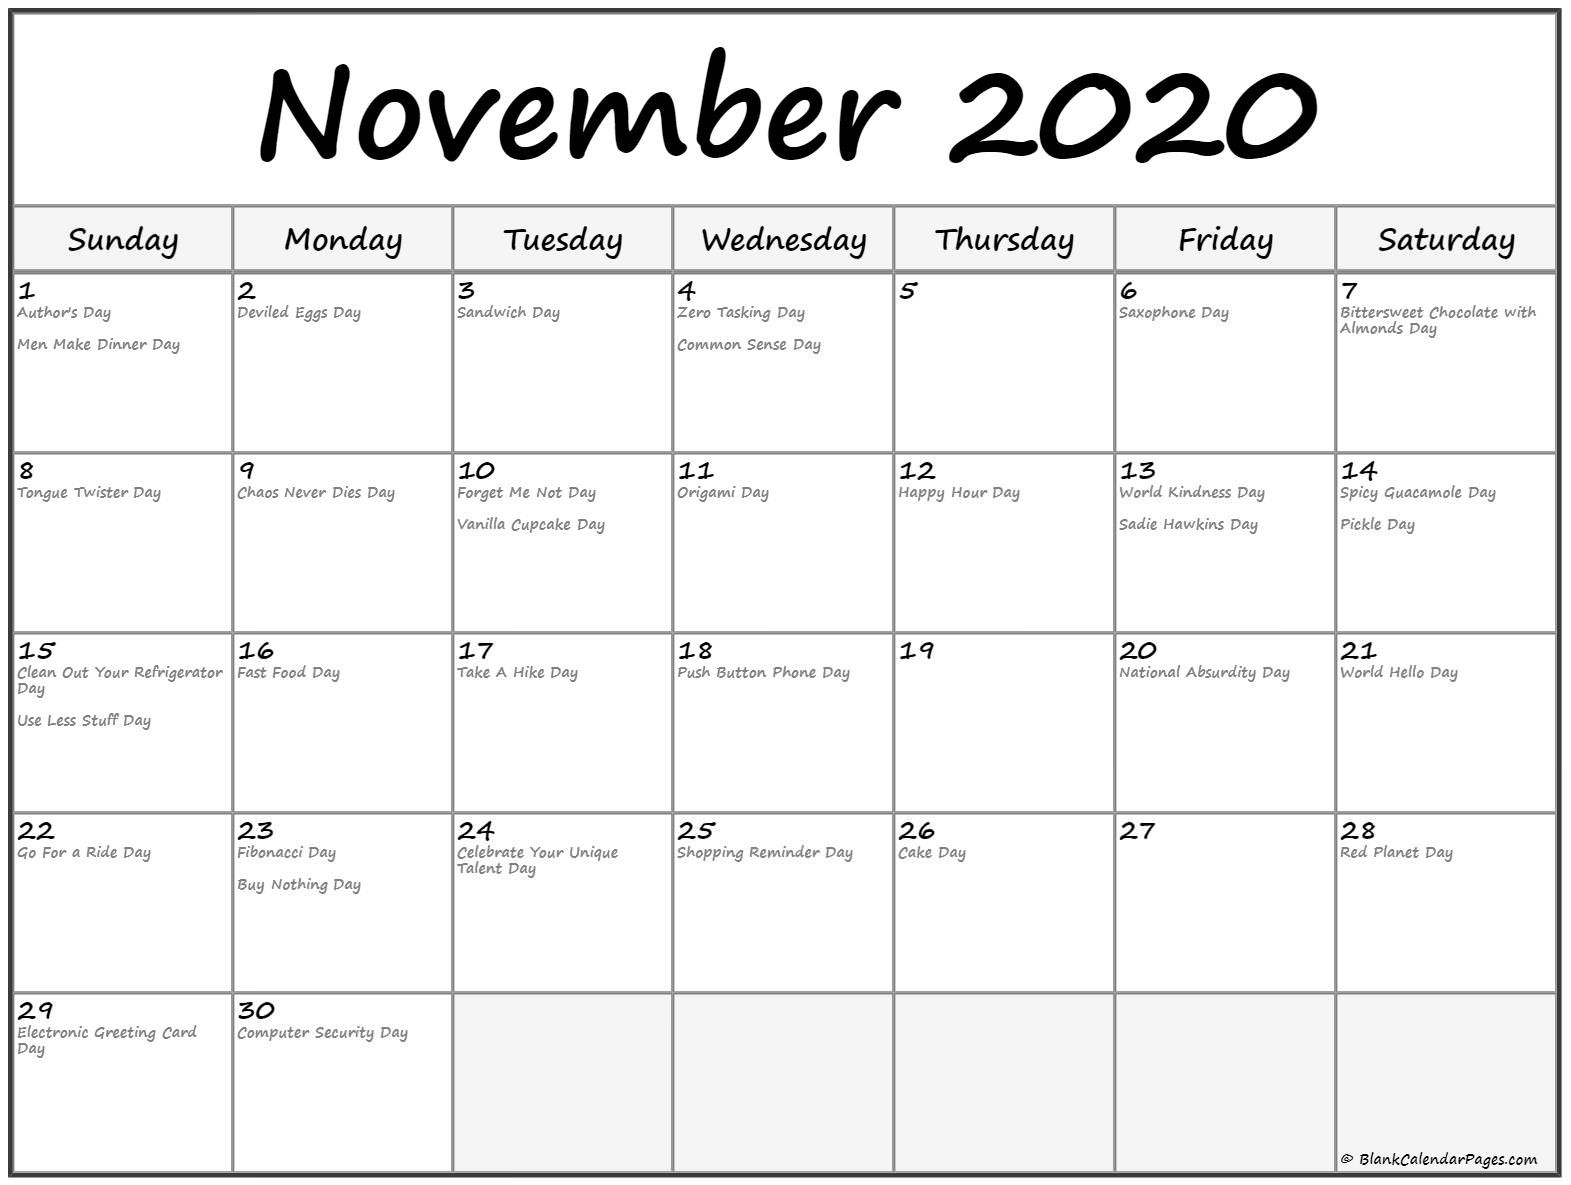 Collection of November 2020 calendars with holidays